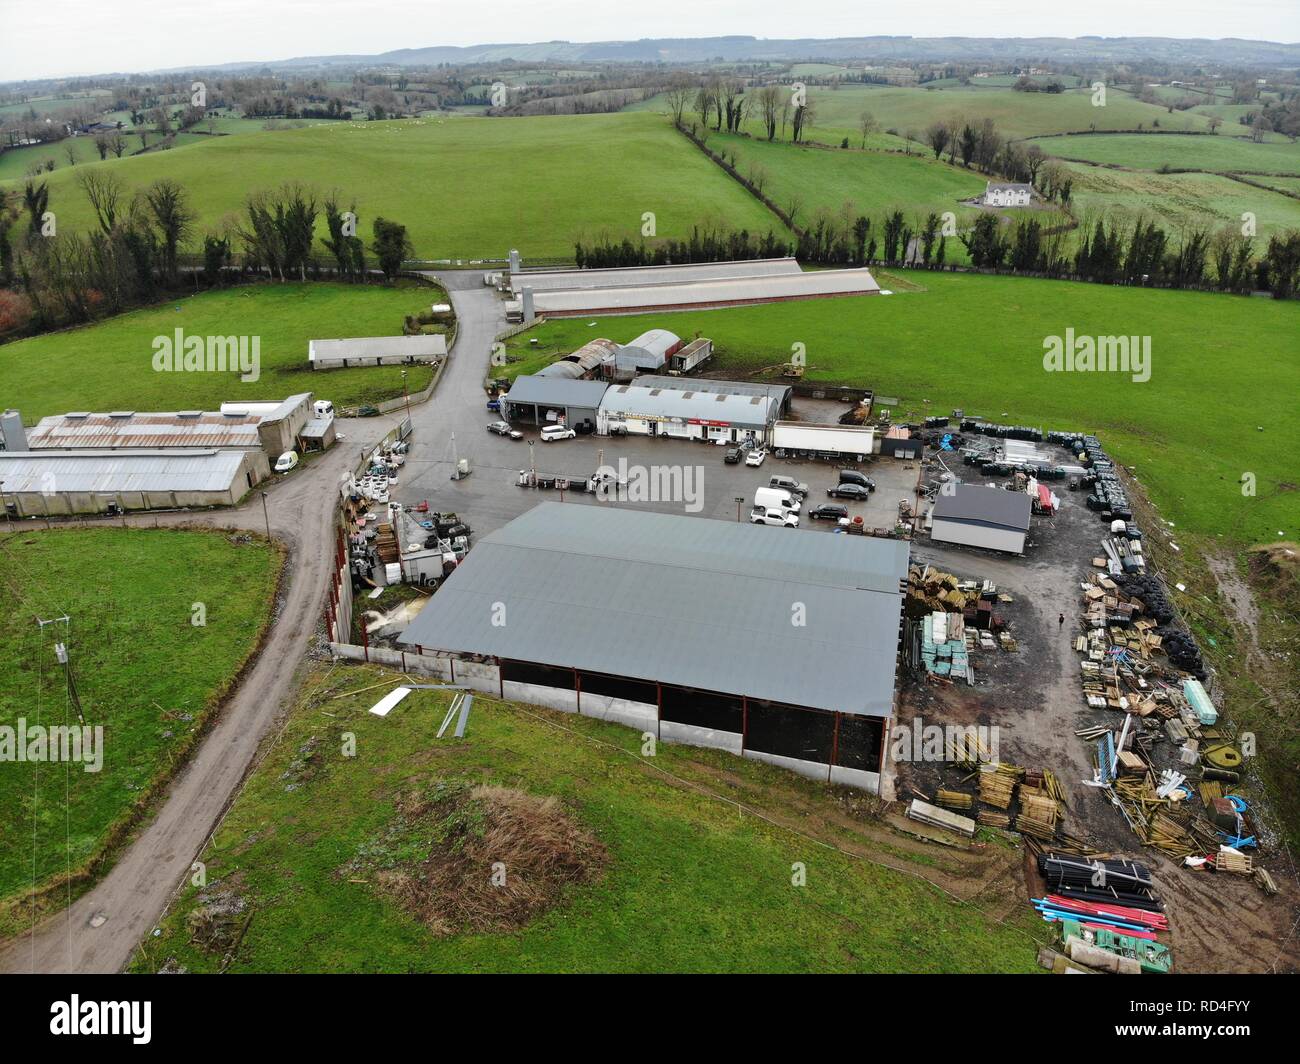 Dublin. 17th Jan, 2019. Aerial photo taken on Jan. 10, 2019 shows the premises on which local businessman Eamon Fitzpatrick running a fuel station and a hardware store, which are separated by the Ireland-UK border, in Drummully Polyp of Clones, Ireland. TO GO WITH feature:Border residents waiting in confusion for Brexit results Credit: Xinhua/Alamy Live News Stock Photo